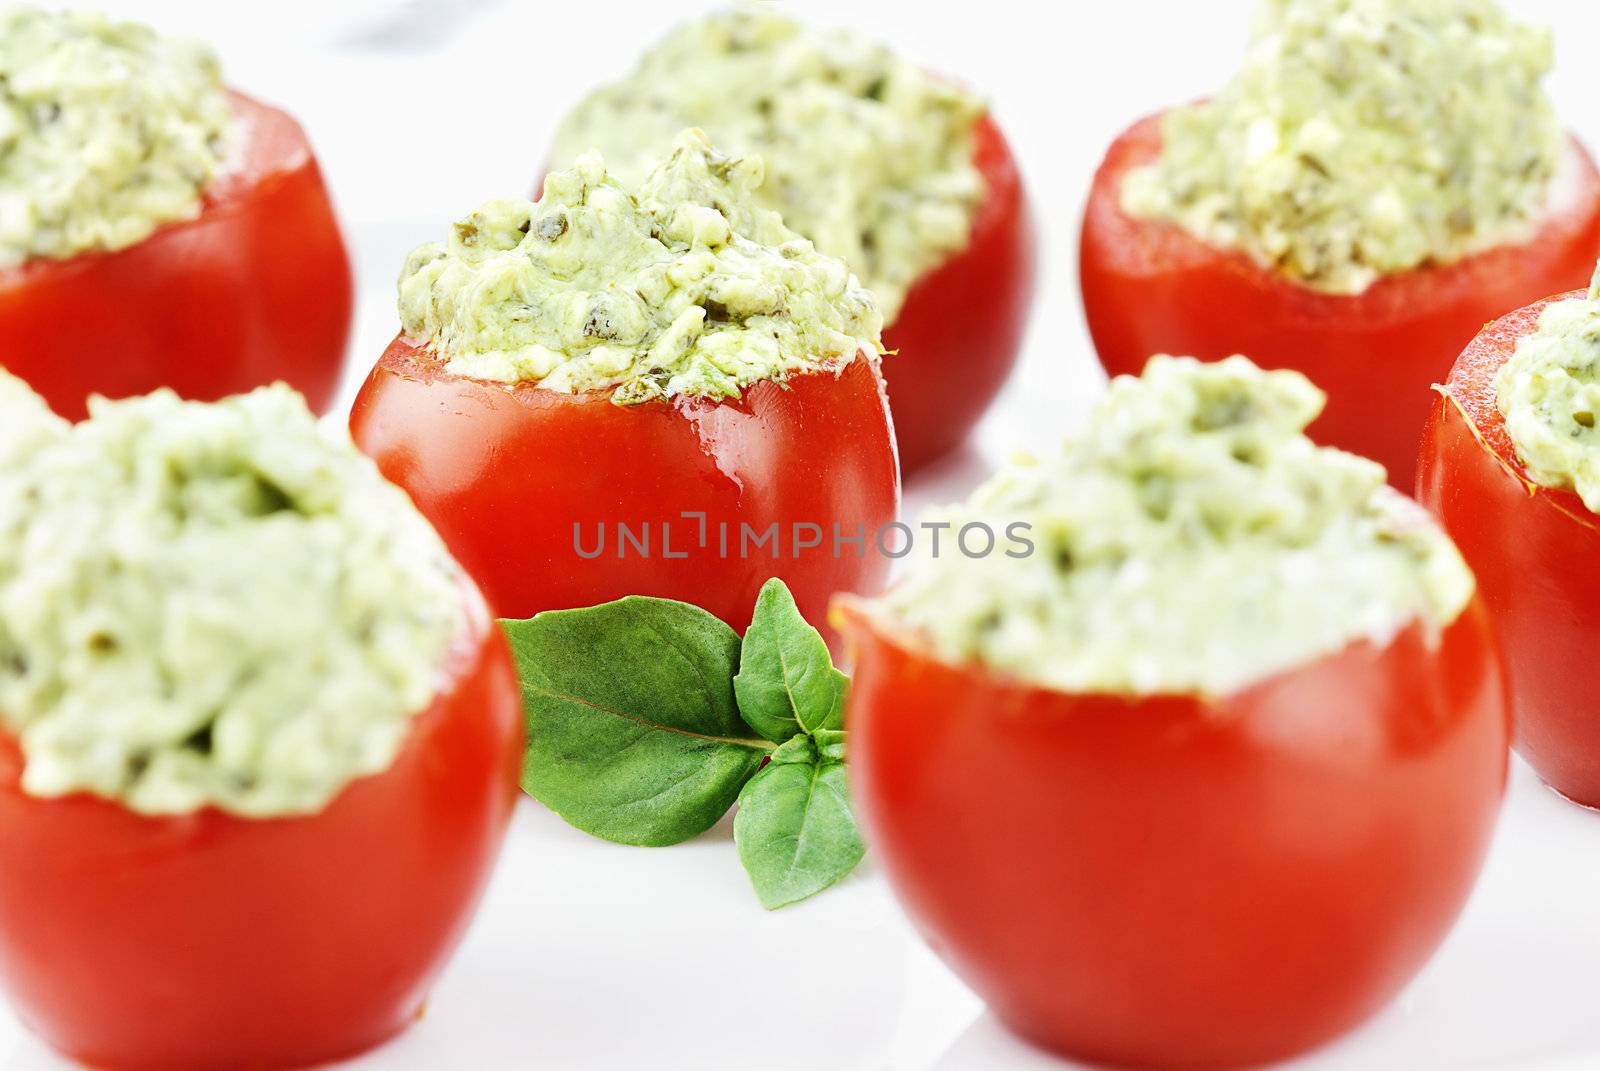 Stuffed Tomatoes filled with a pesto and avocado mixture. Extreme shallow depth of field with selective focus on center tomato.